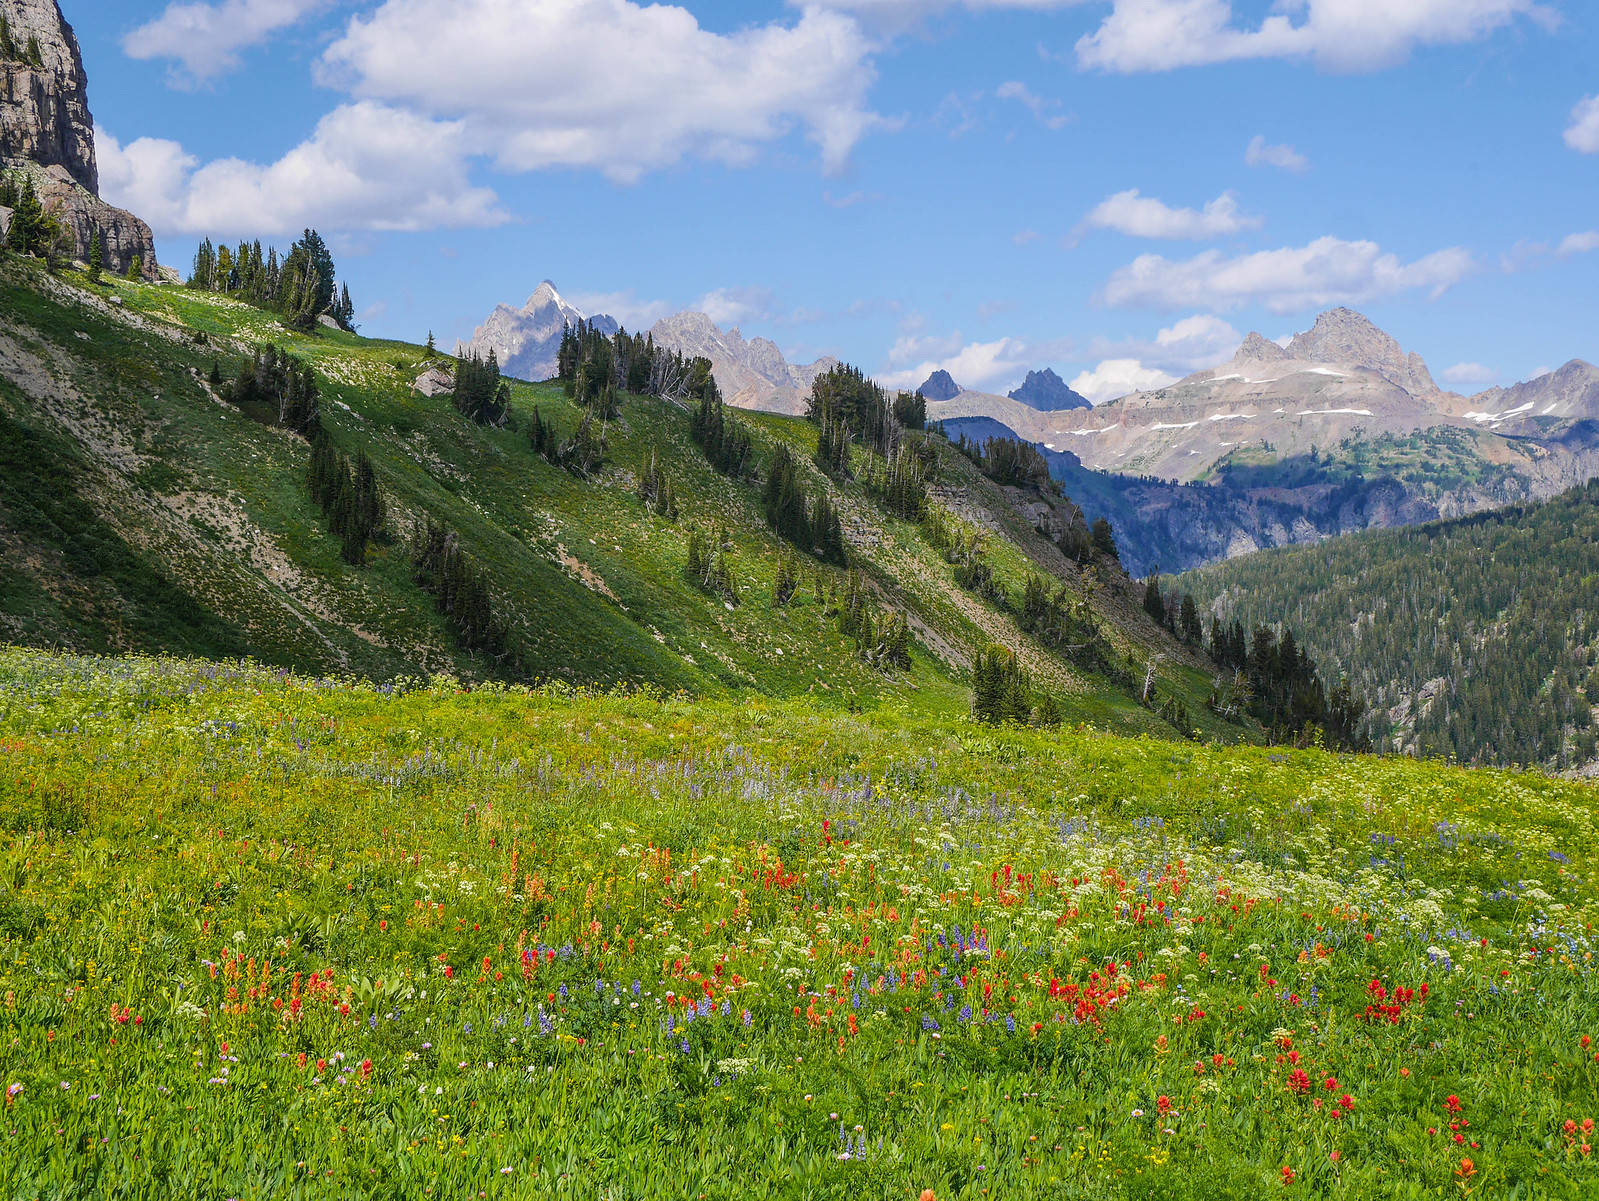 Tetons! and Death Canyon. And wildflowers or w/e